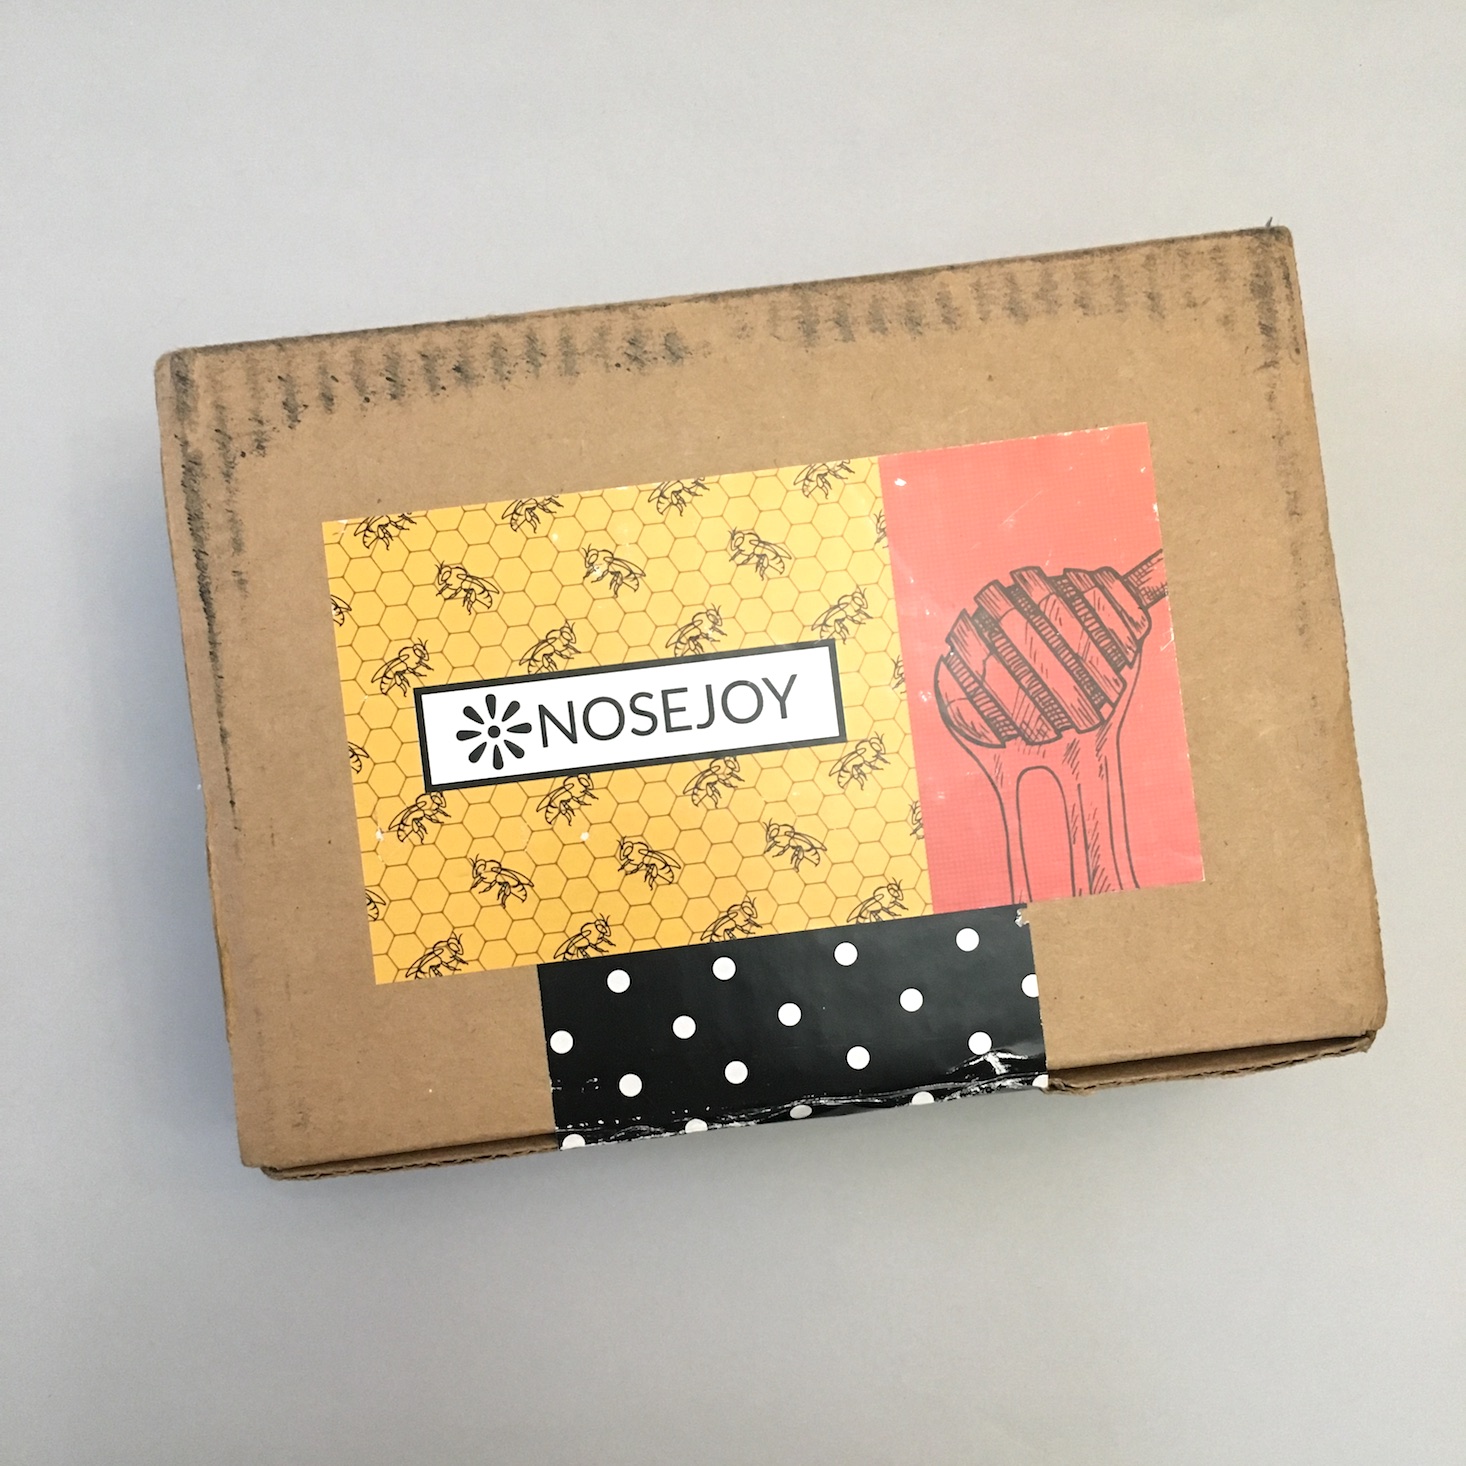 Nosejoy Subscription Box “Warm Honey” Review + Coupon – January 2019